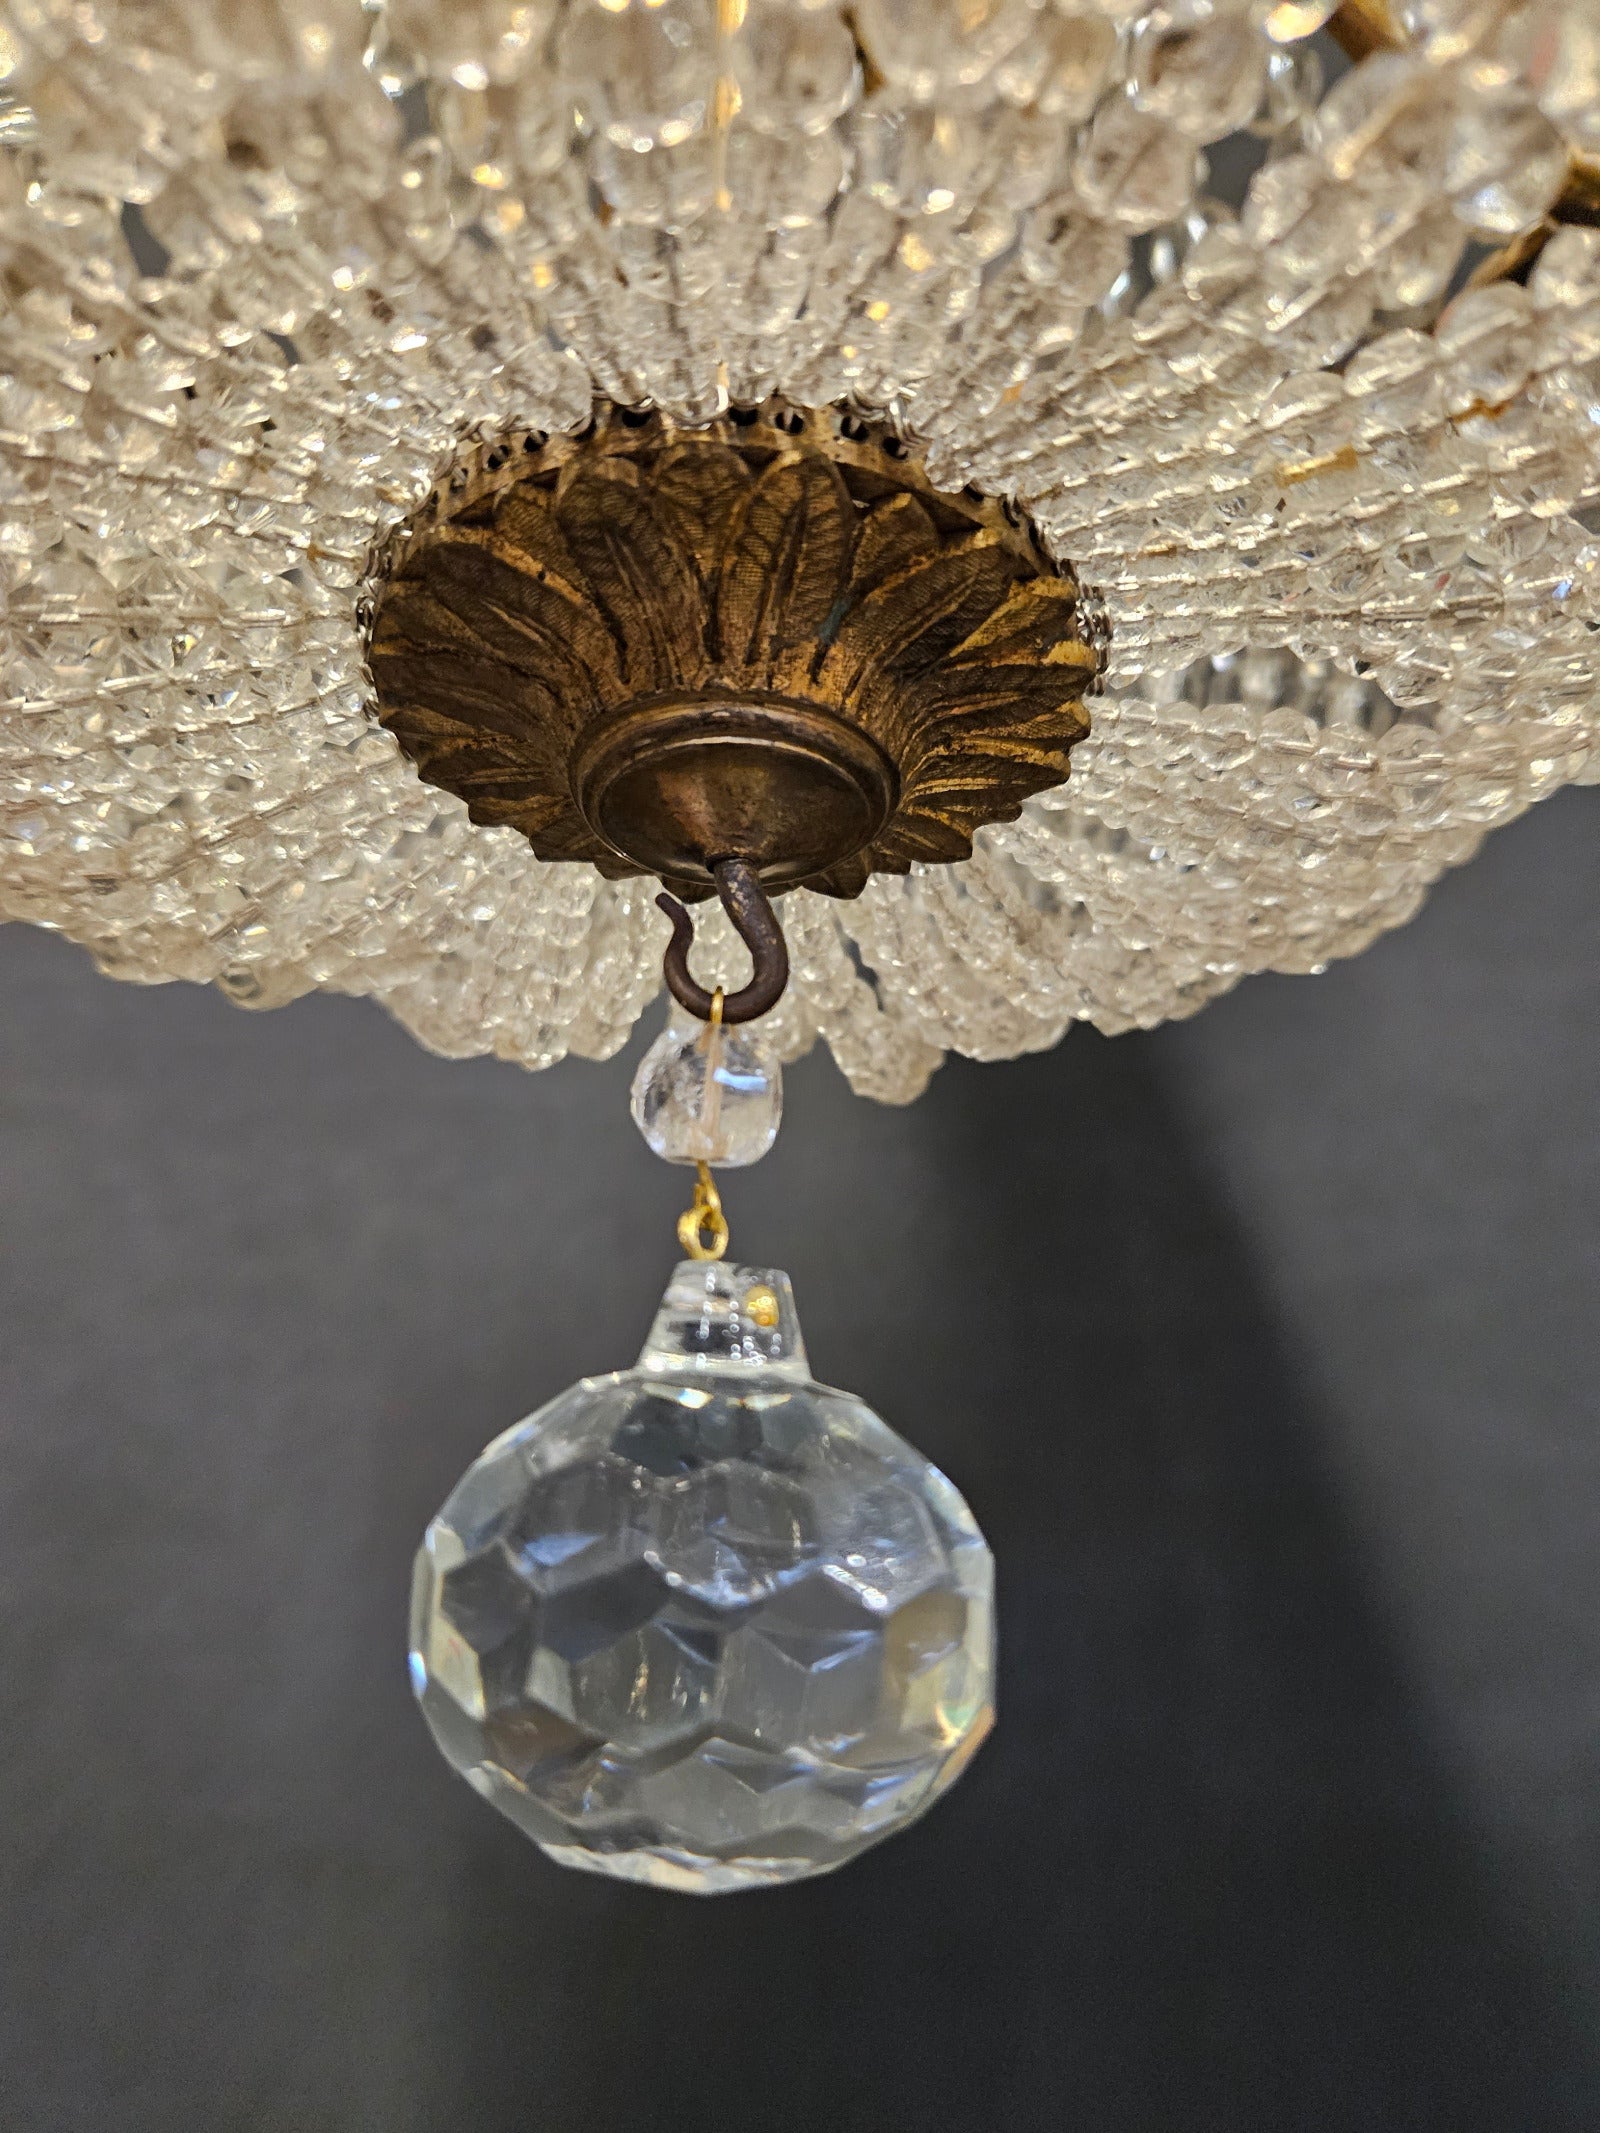 view of bottom bubble on chandelier